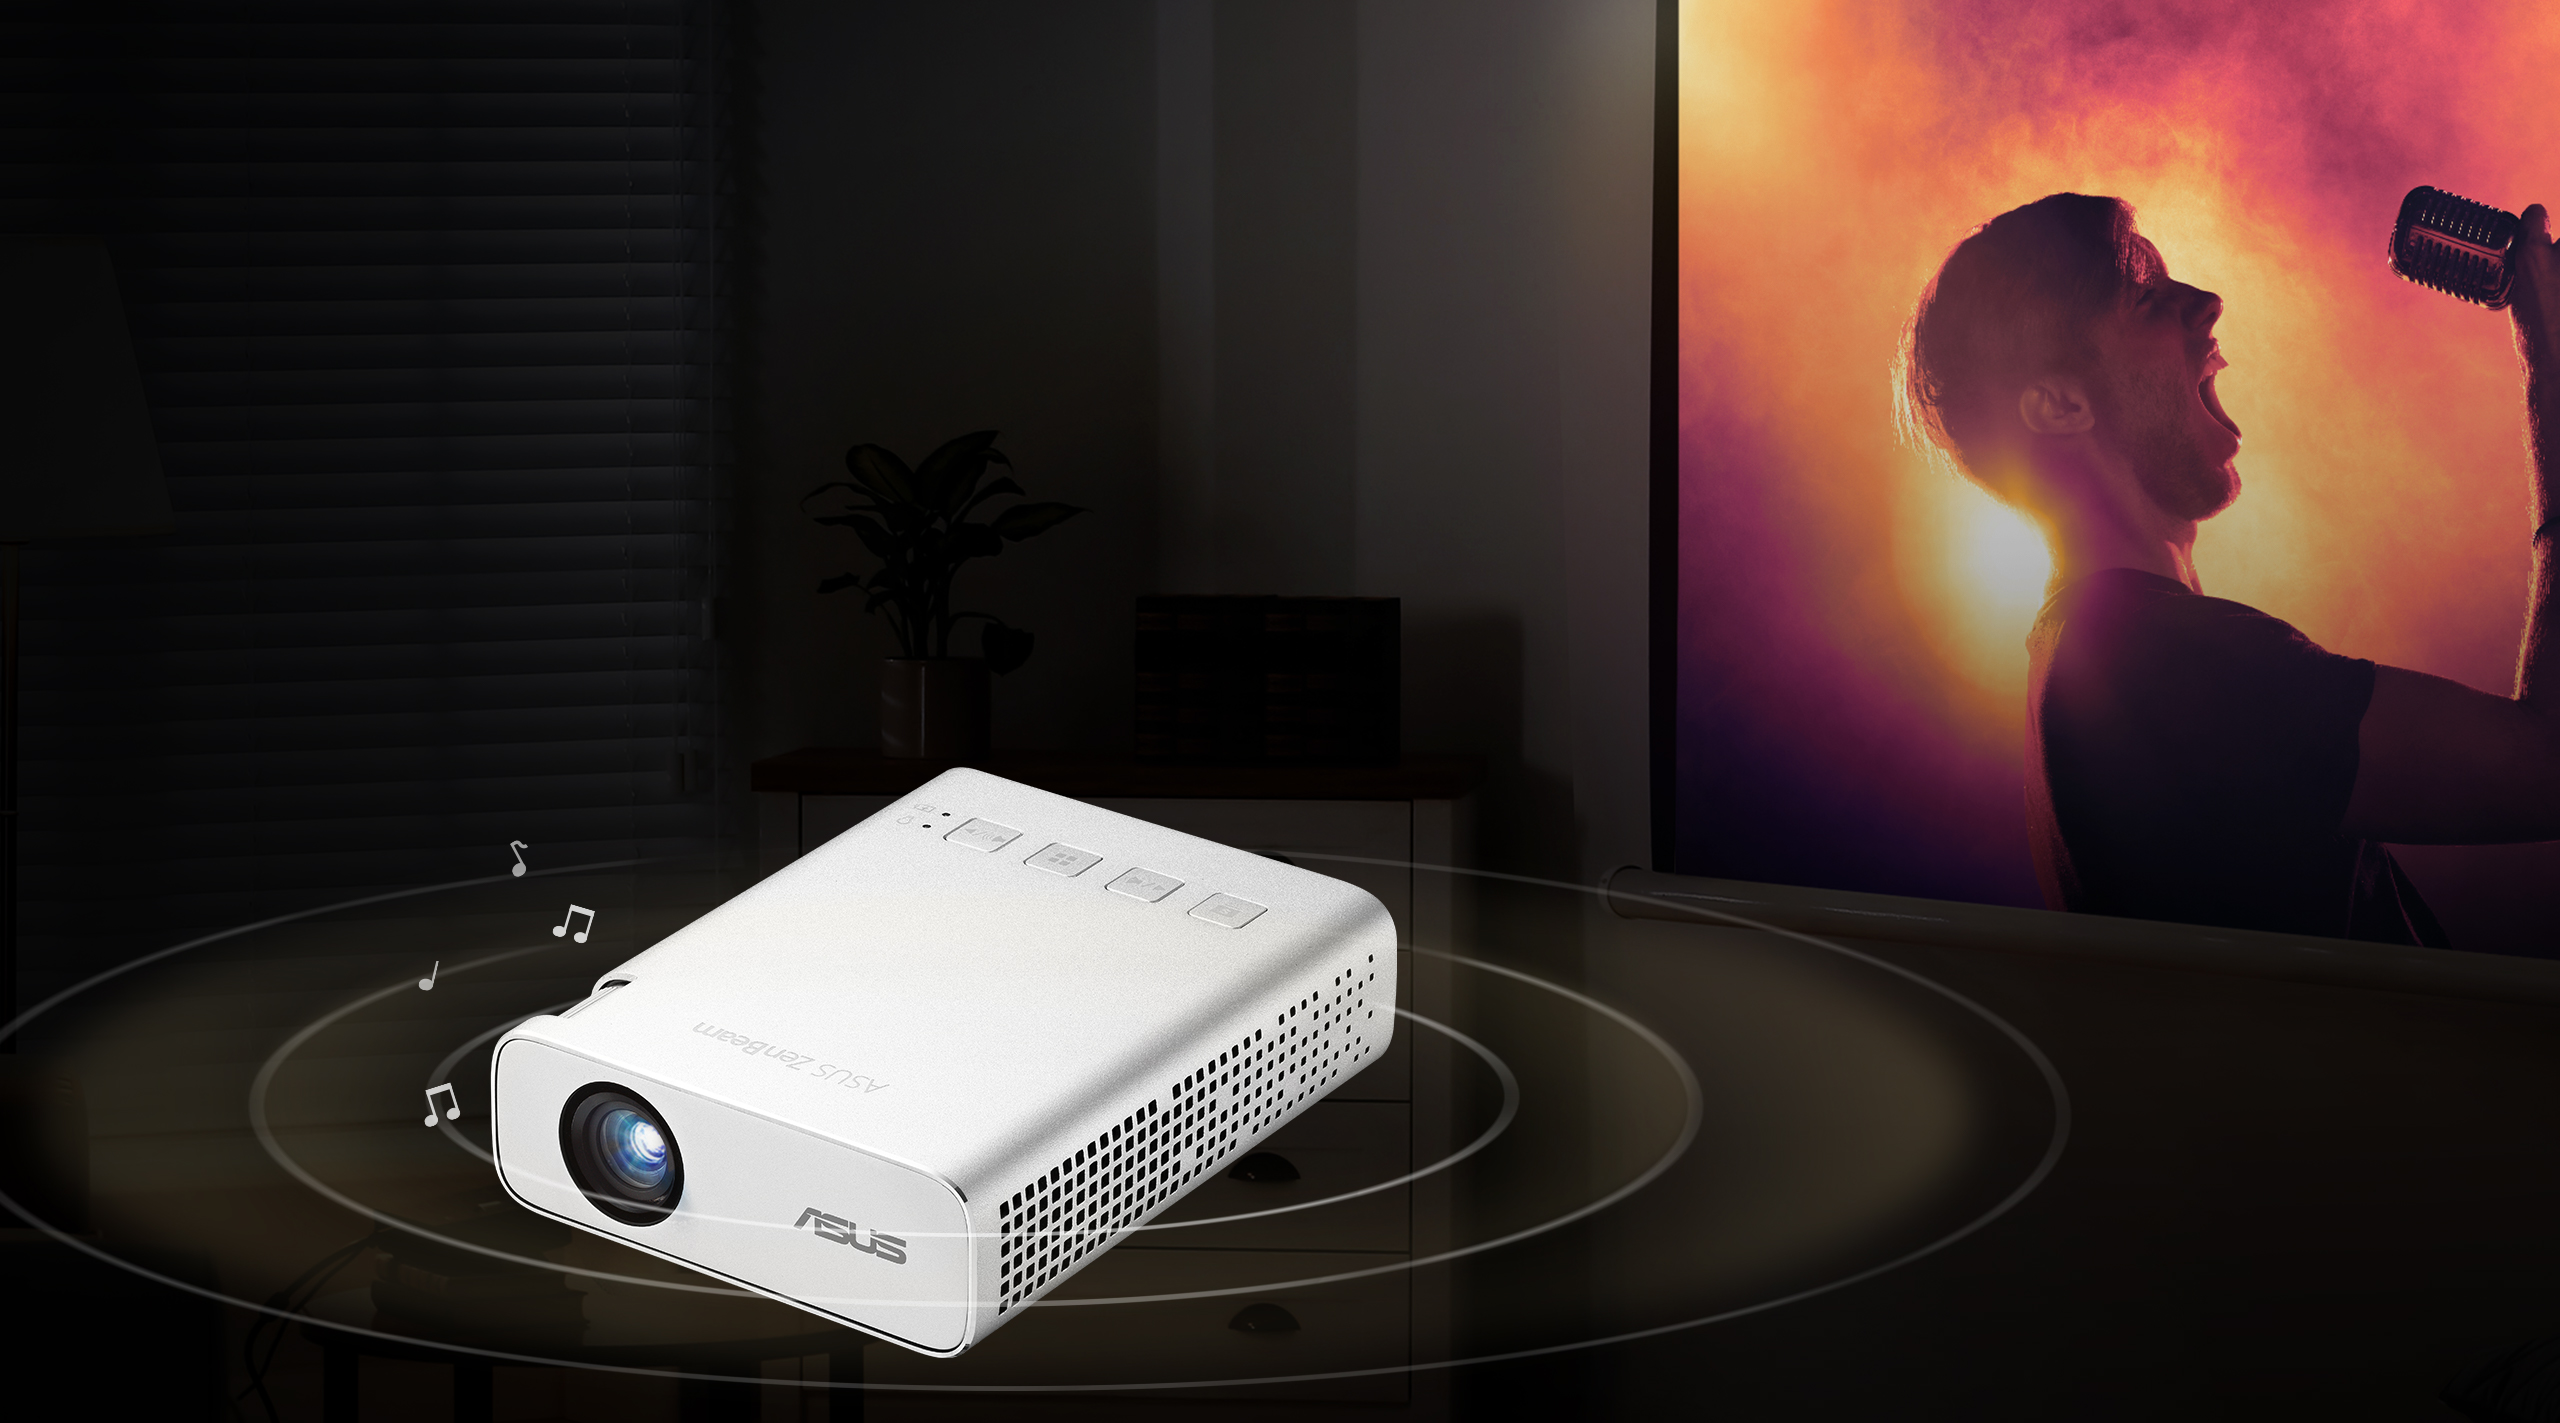 ASUS ZenBeam E1R includes a built-in 2-watt speaker with ASUS SonicMaster technology offers amazing audio